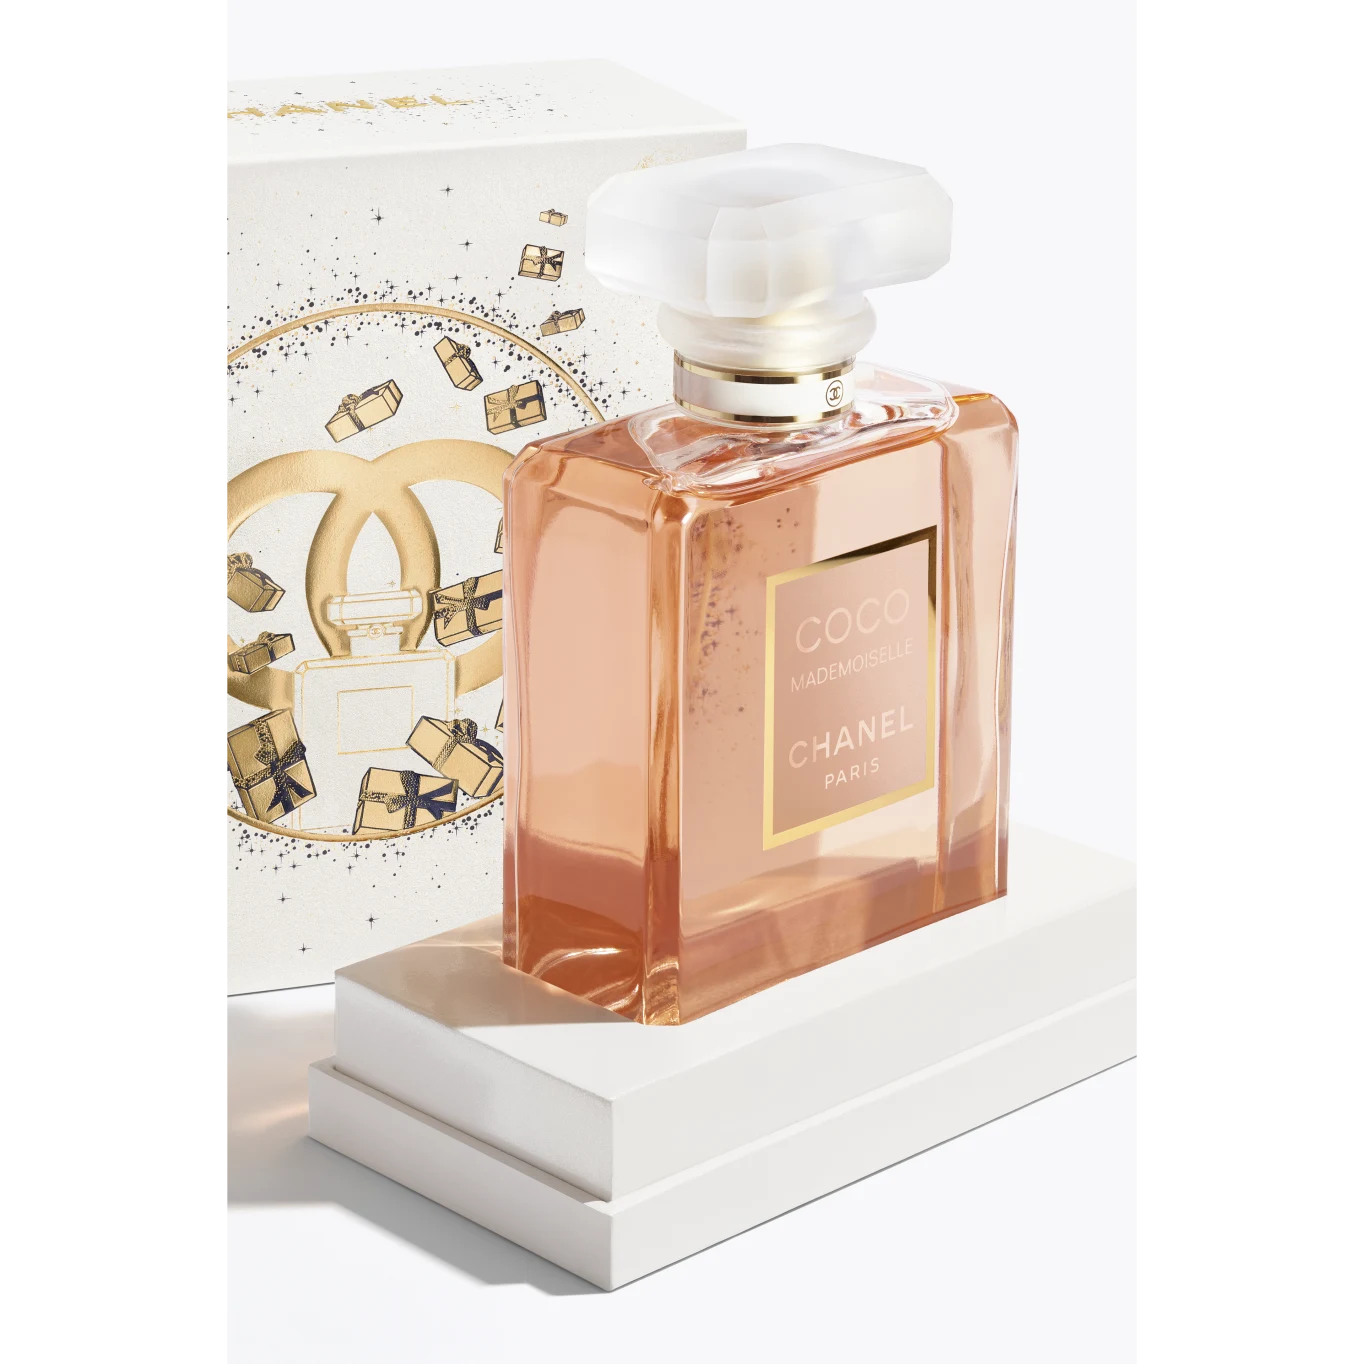 Chanel Coco Mademoiselle, the perfect holiday gift